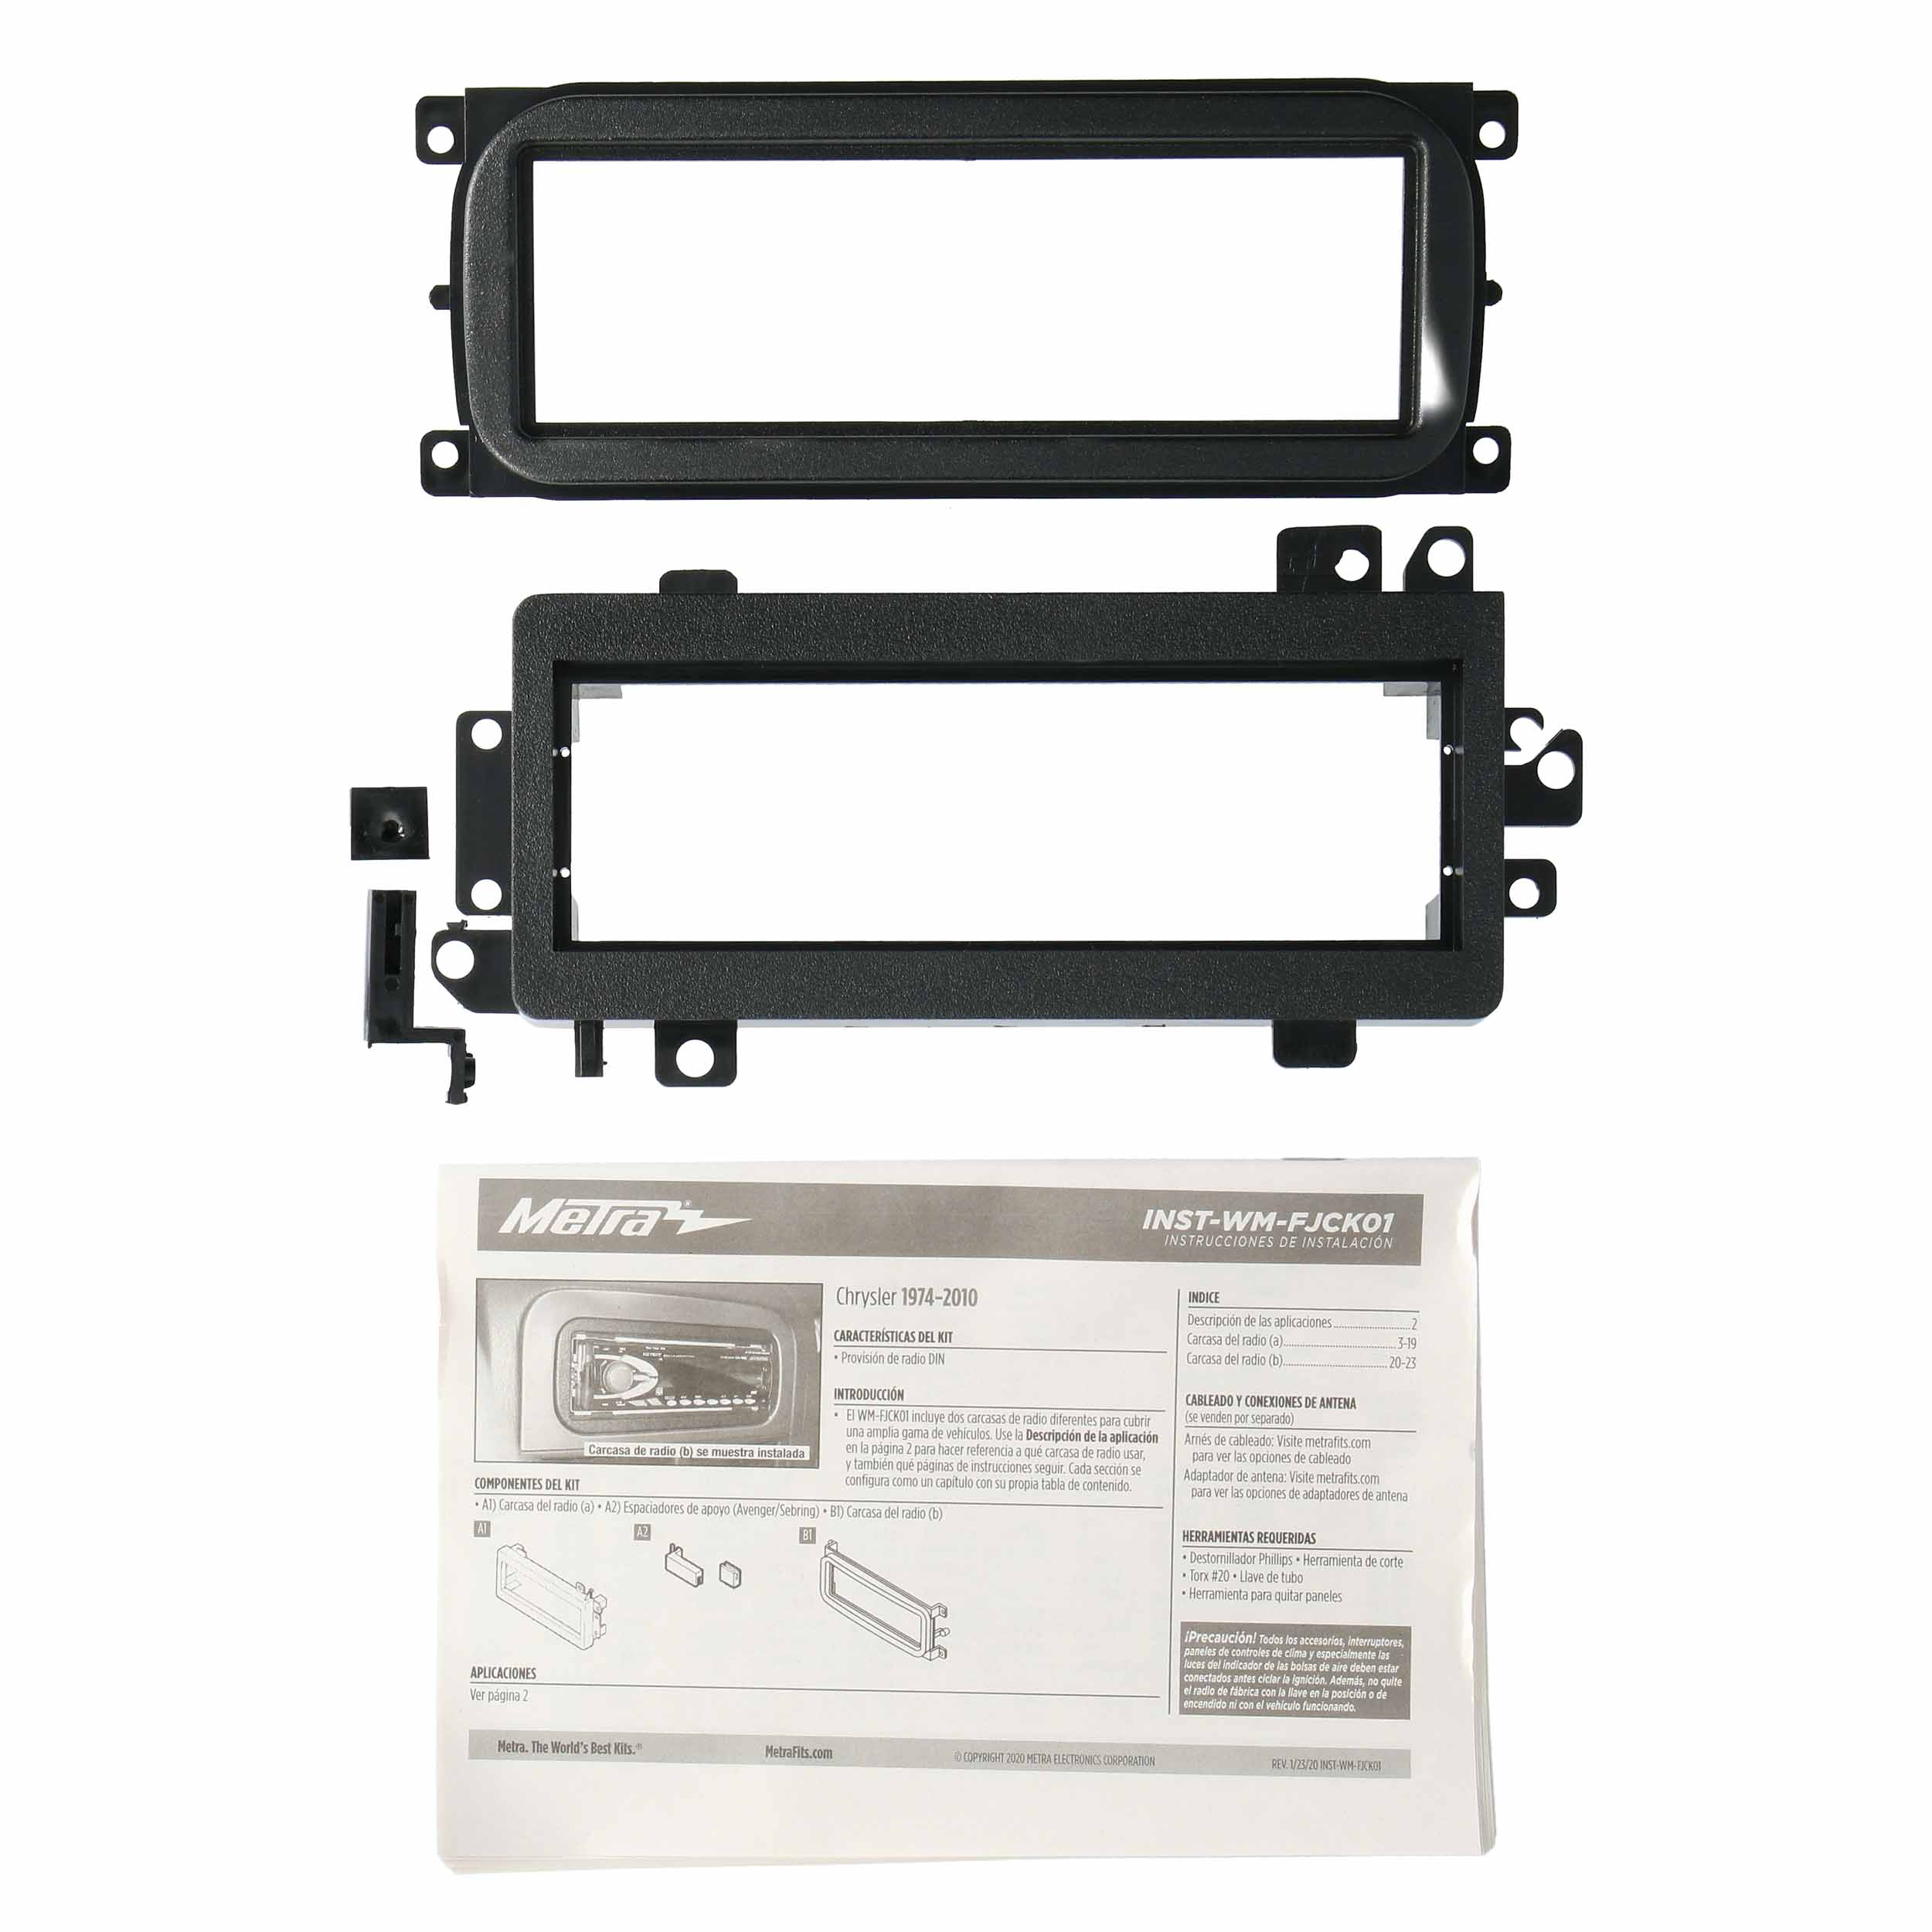 Metra WM-FJCK01 Single DIN Radio Installation Kit for Select Ford-jeep-Chrysler 1974-up, Black New - image 1 of 13